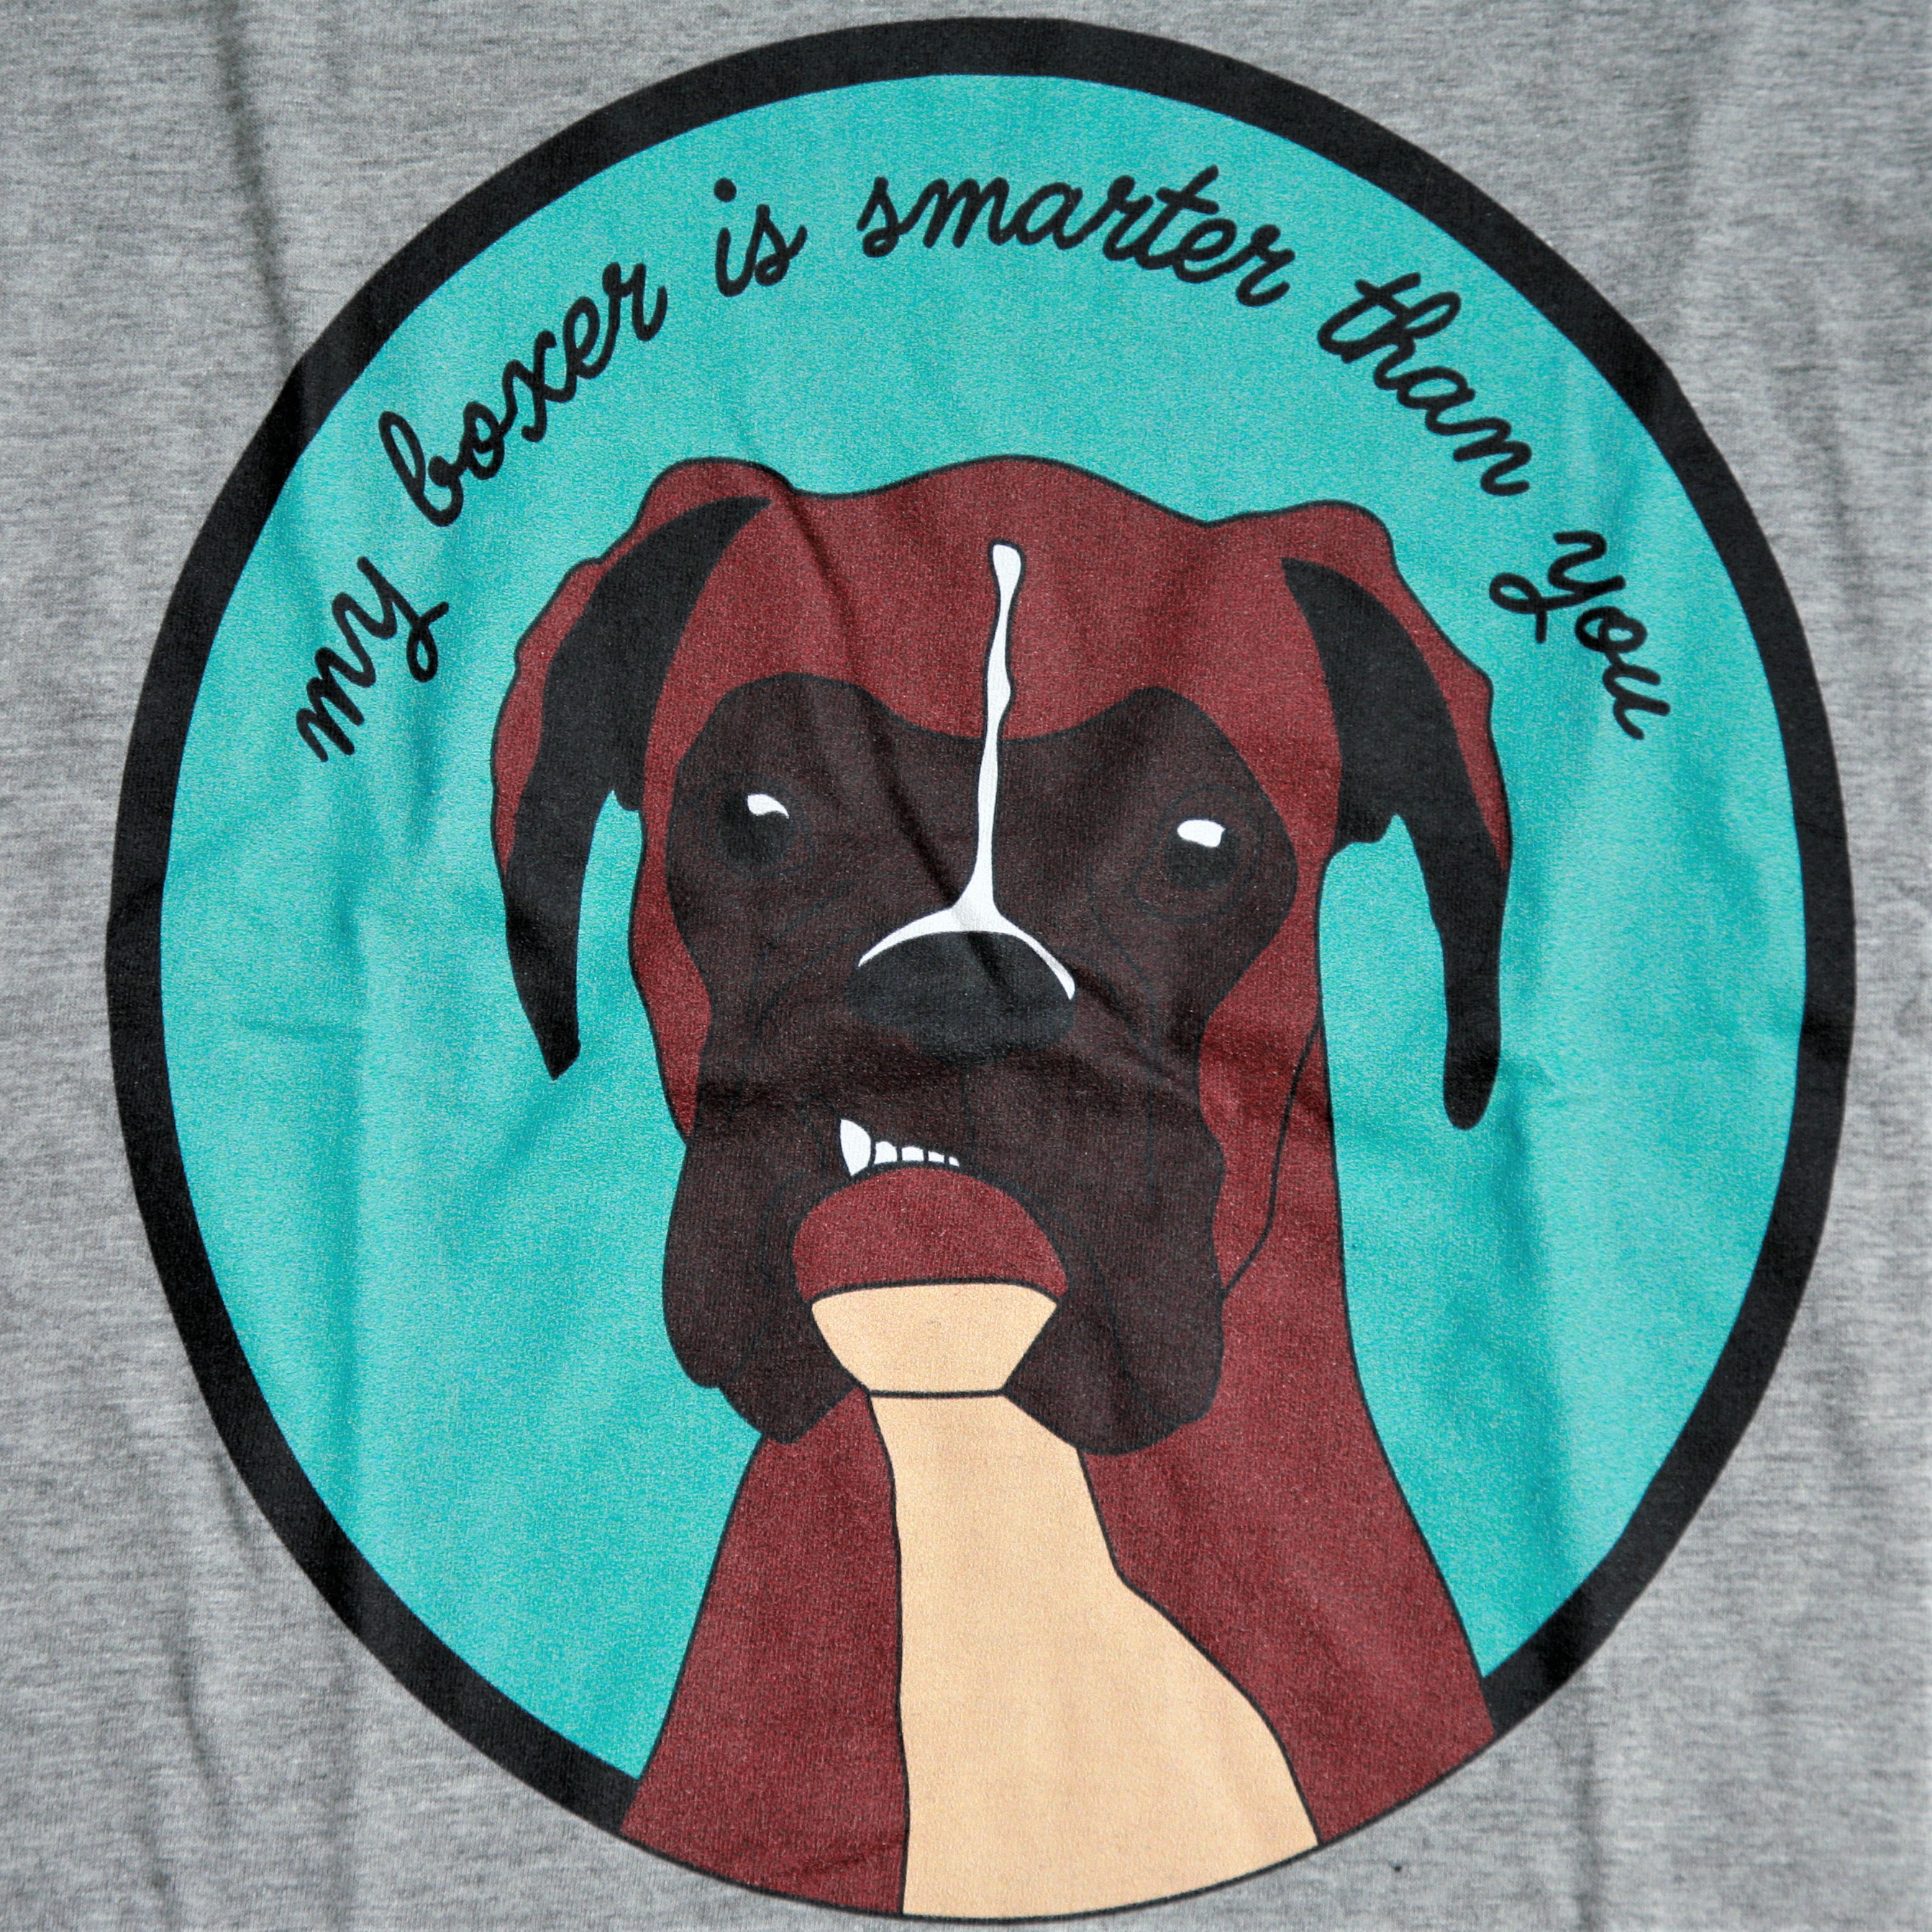 tee shirt "my boxer is smartter than you"